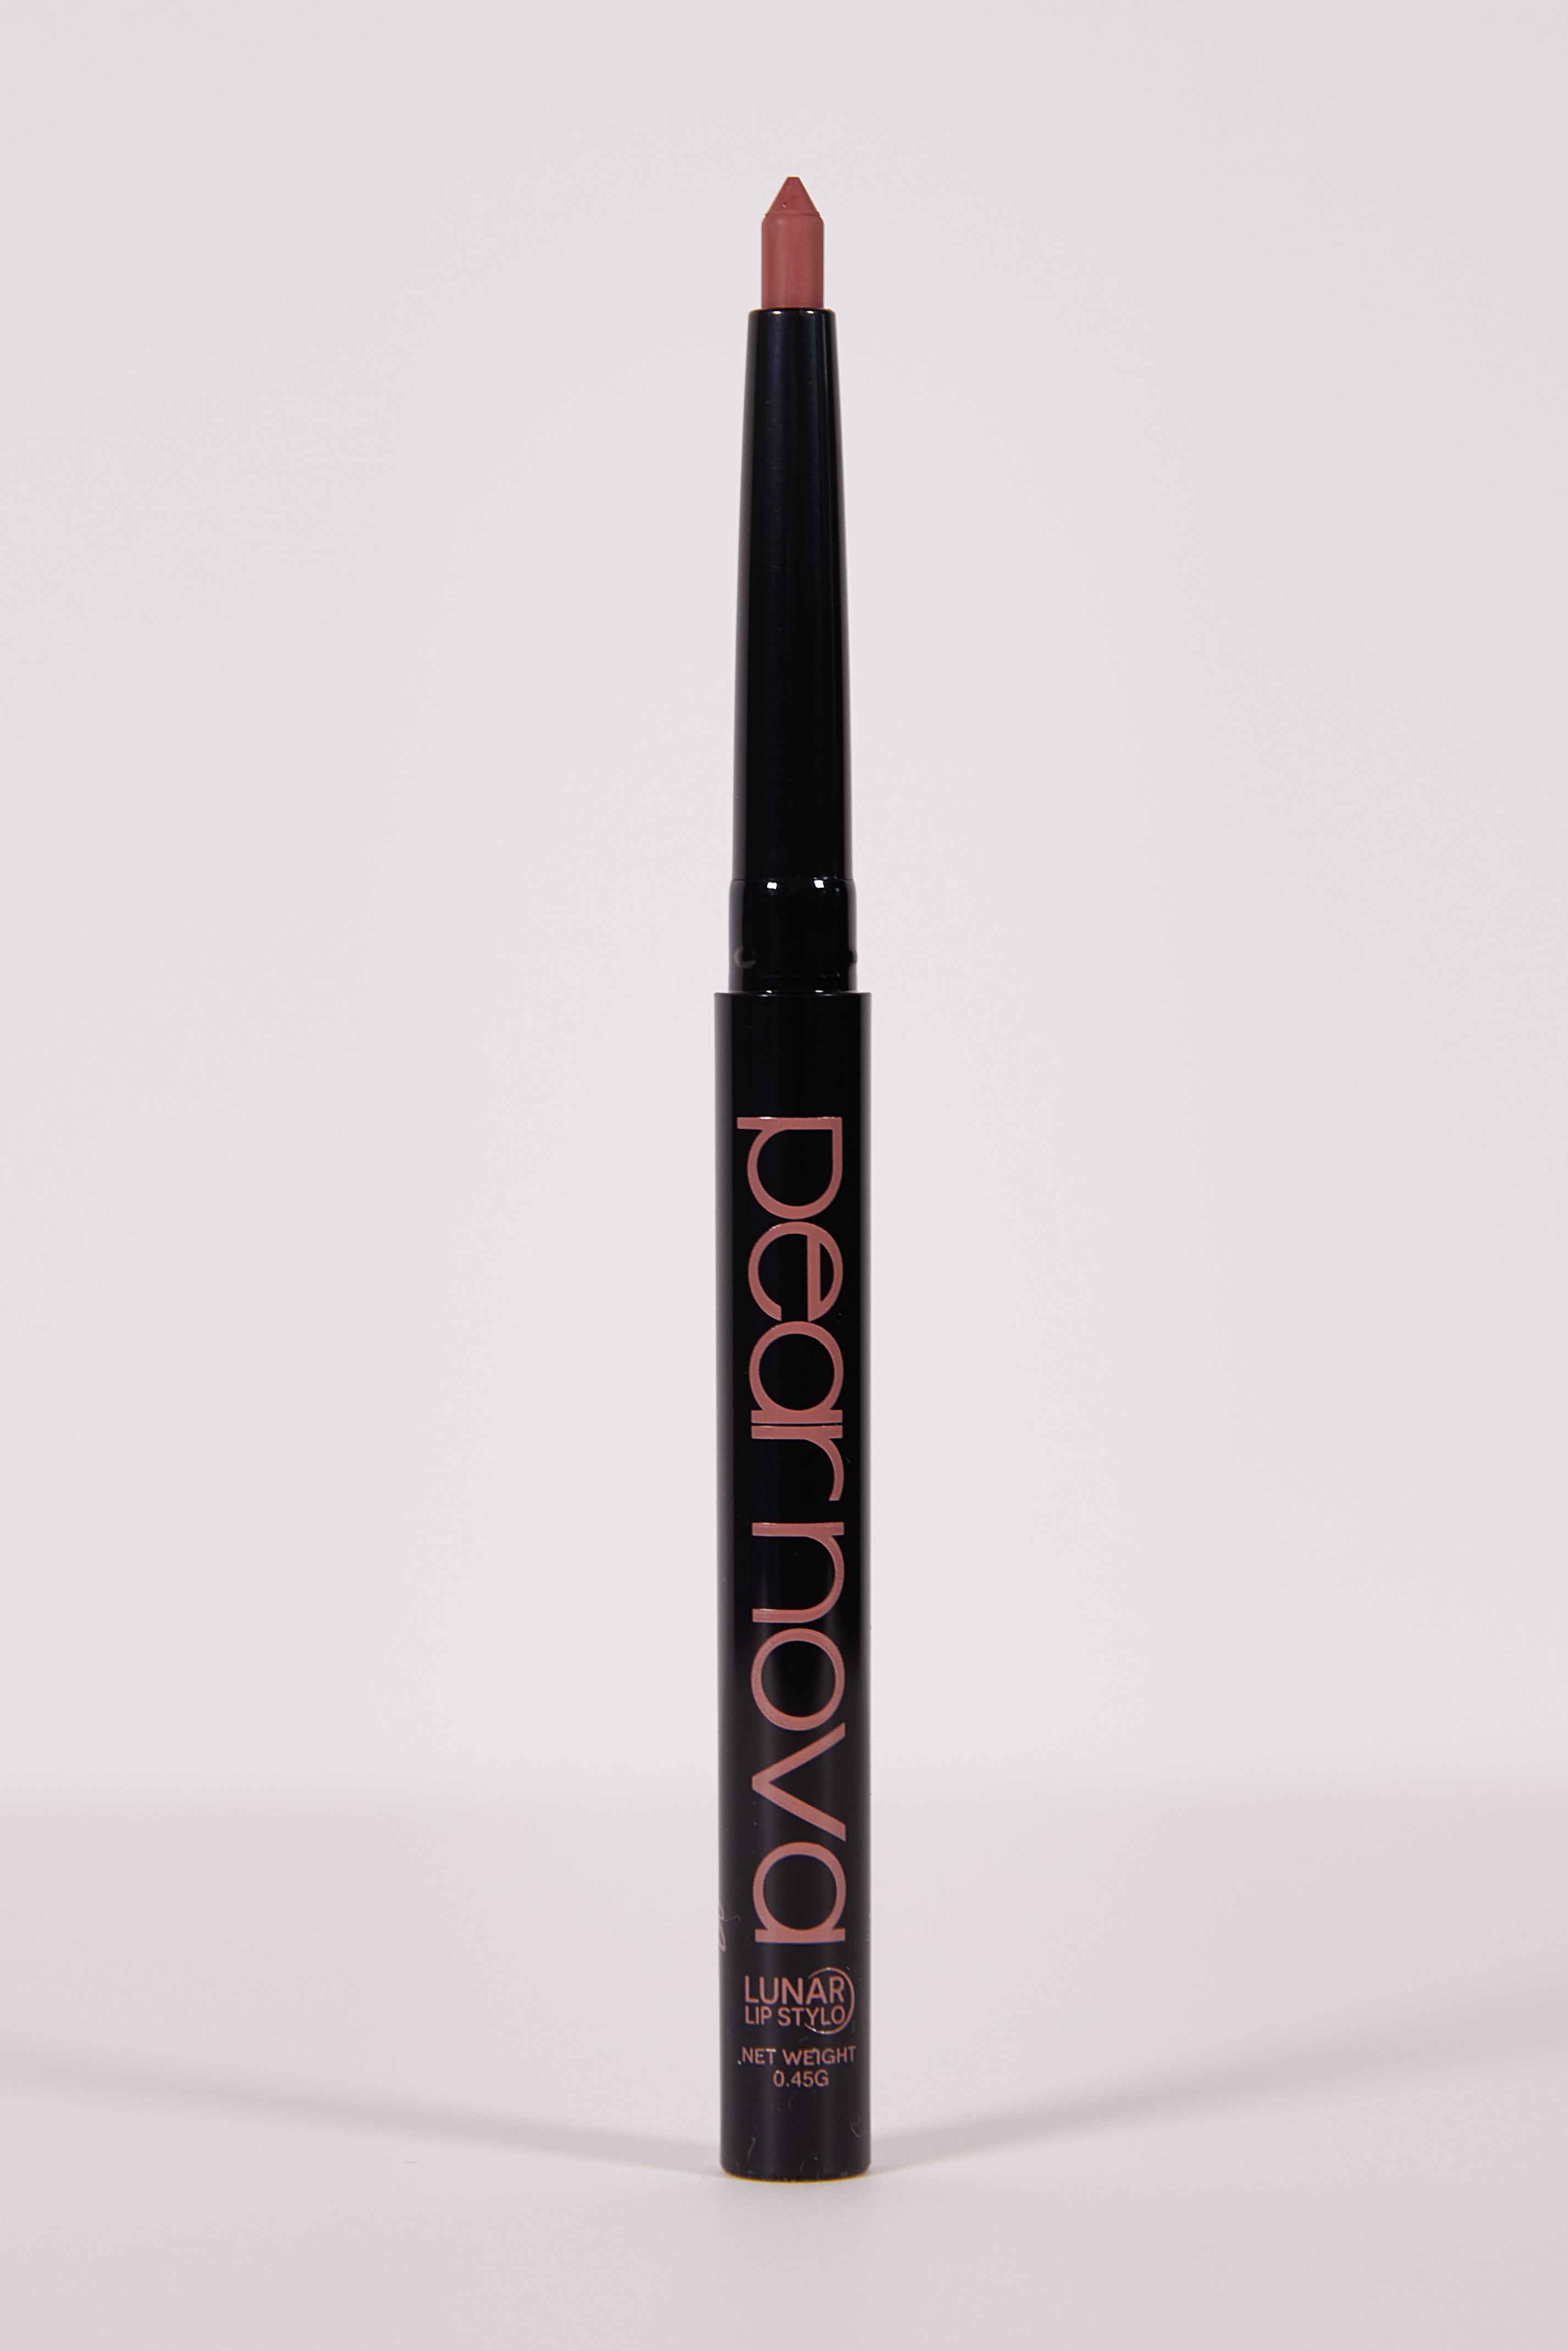 pear nova asteroid lip stylo product with cap off